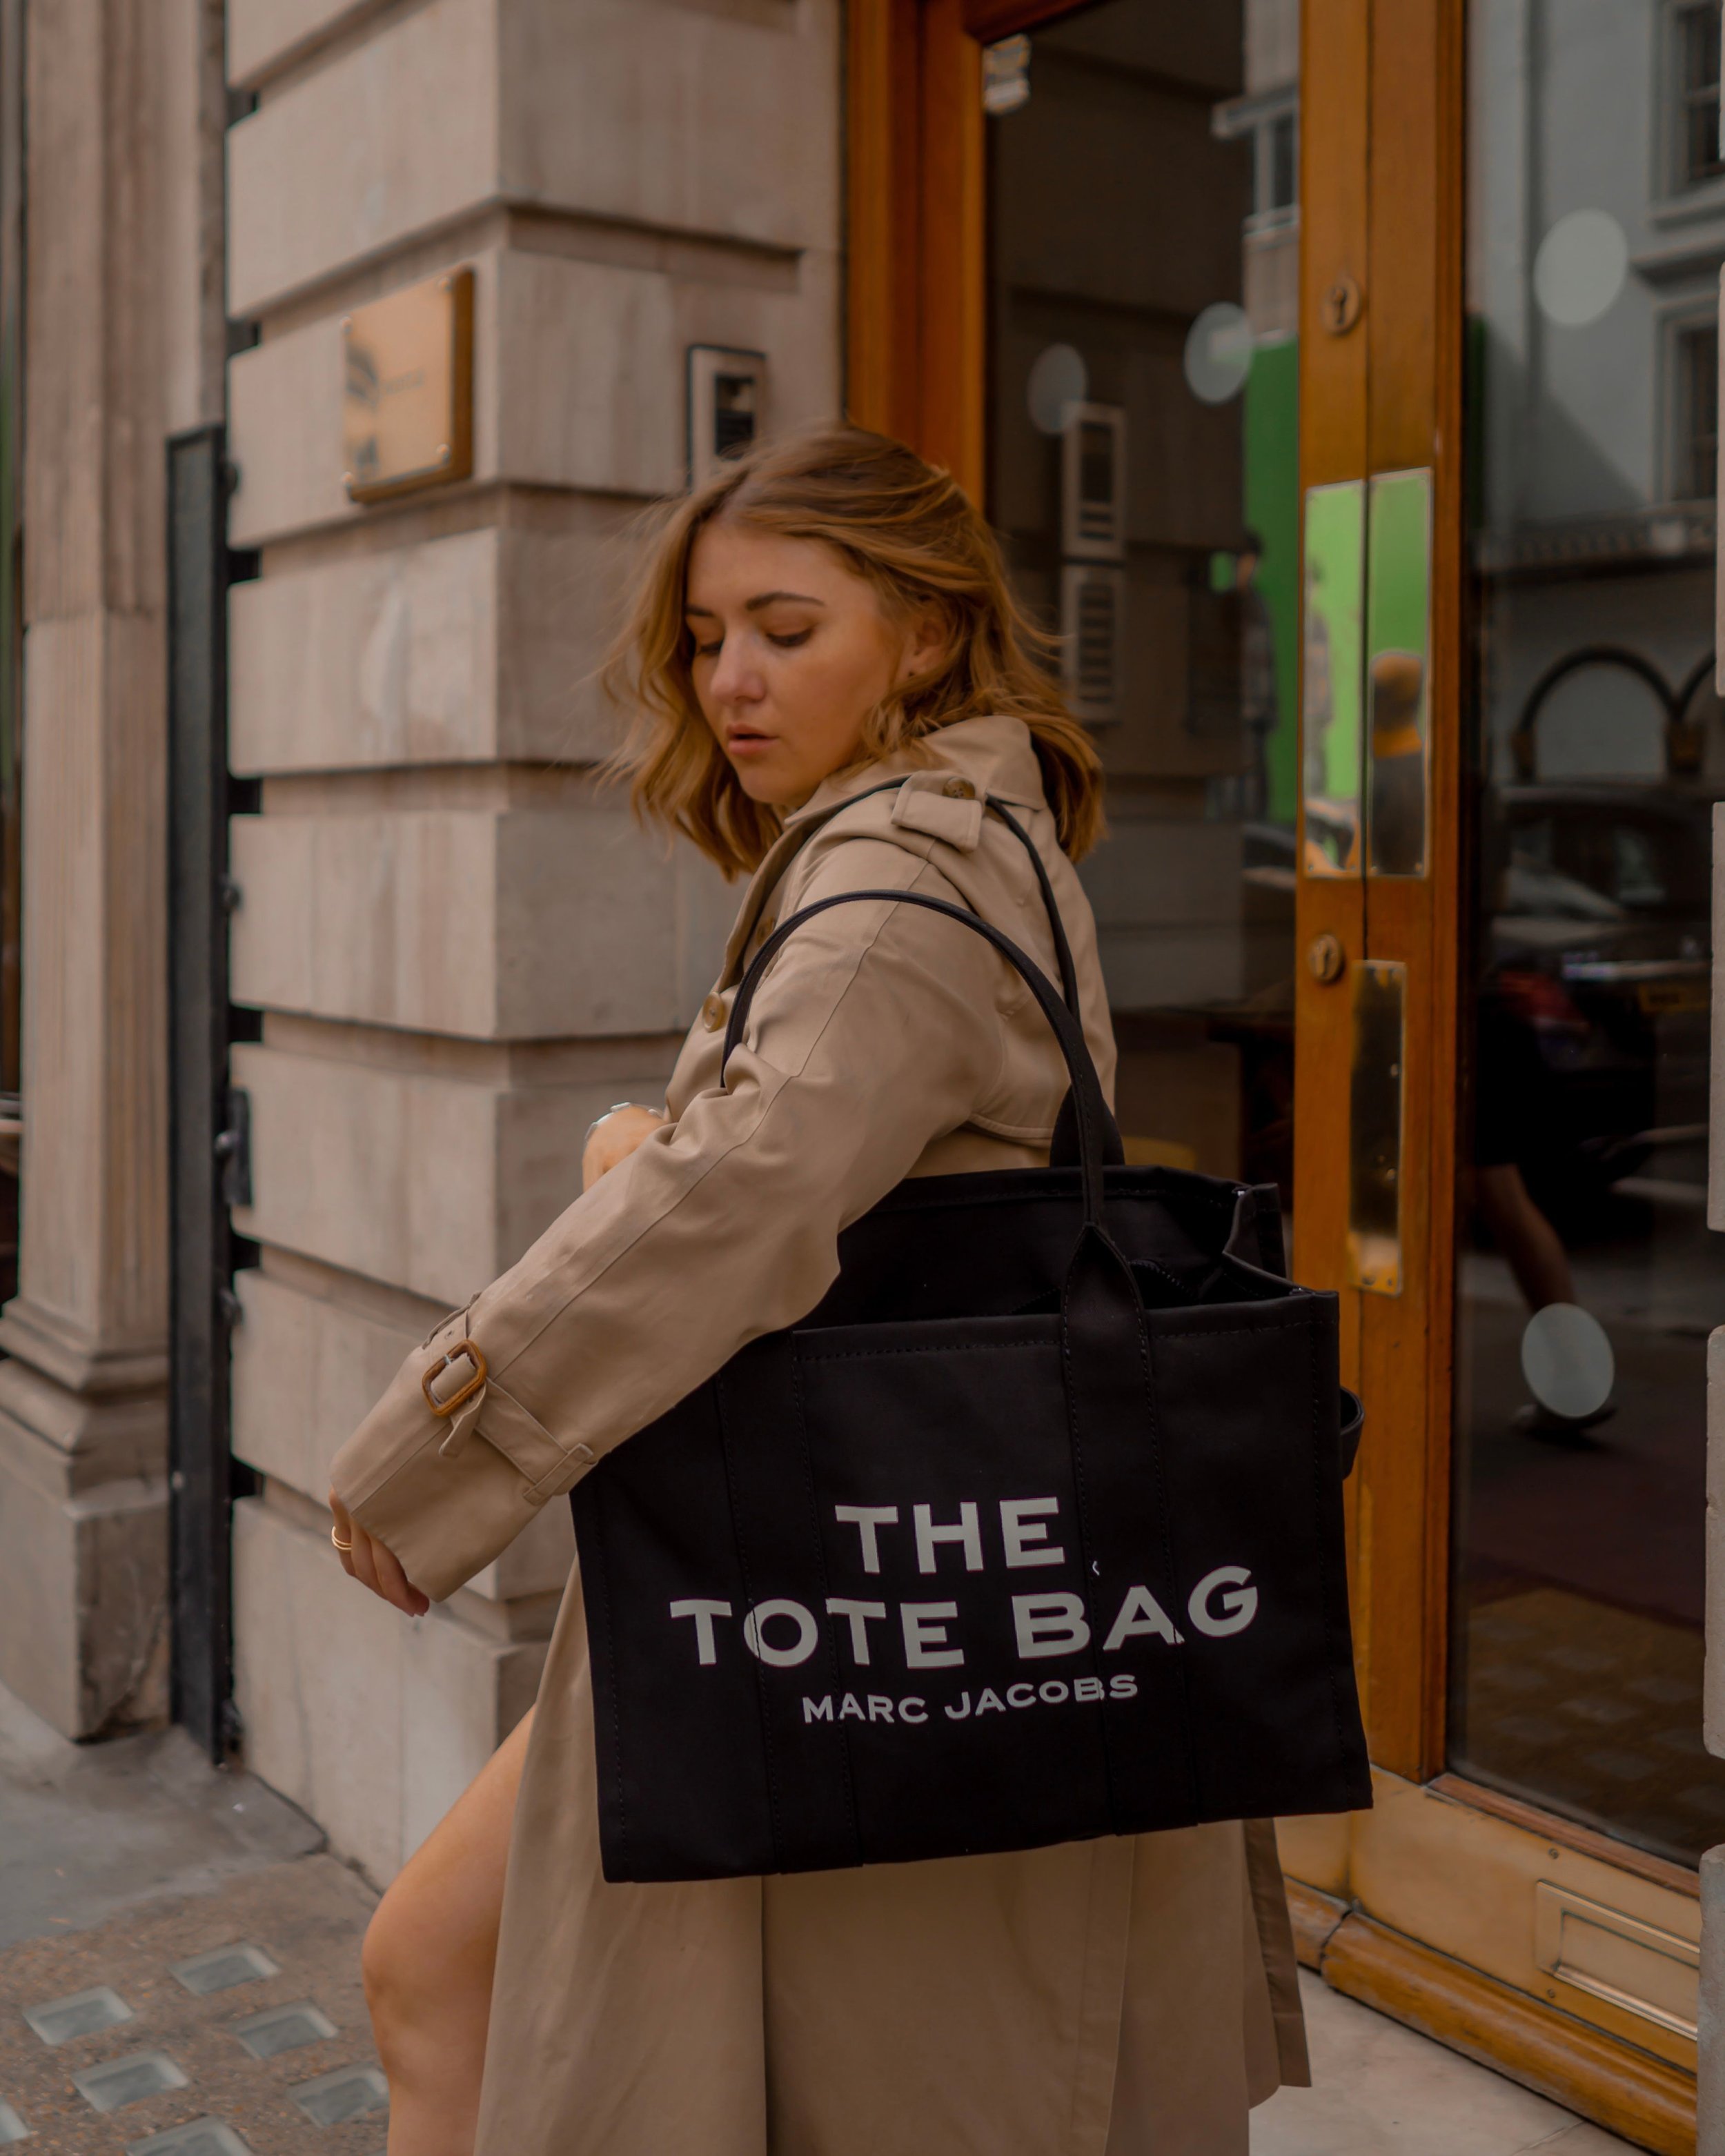 WHAT'S IN YOUR MARC JACOB TOTE BAG — VANITY STORIES